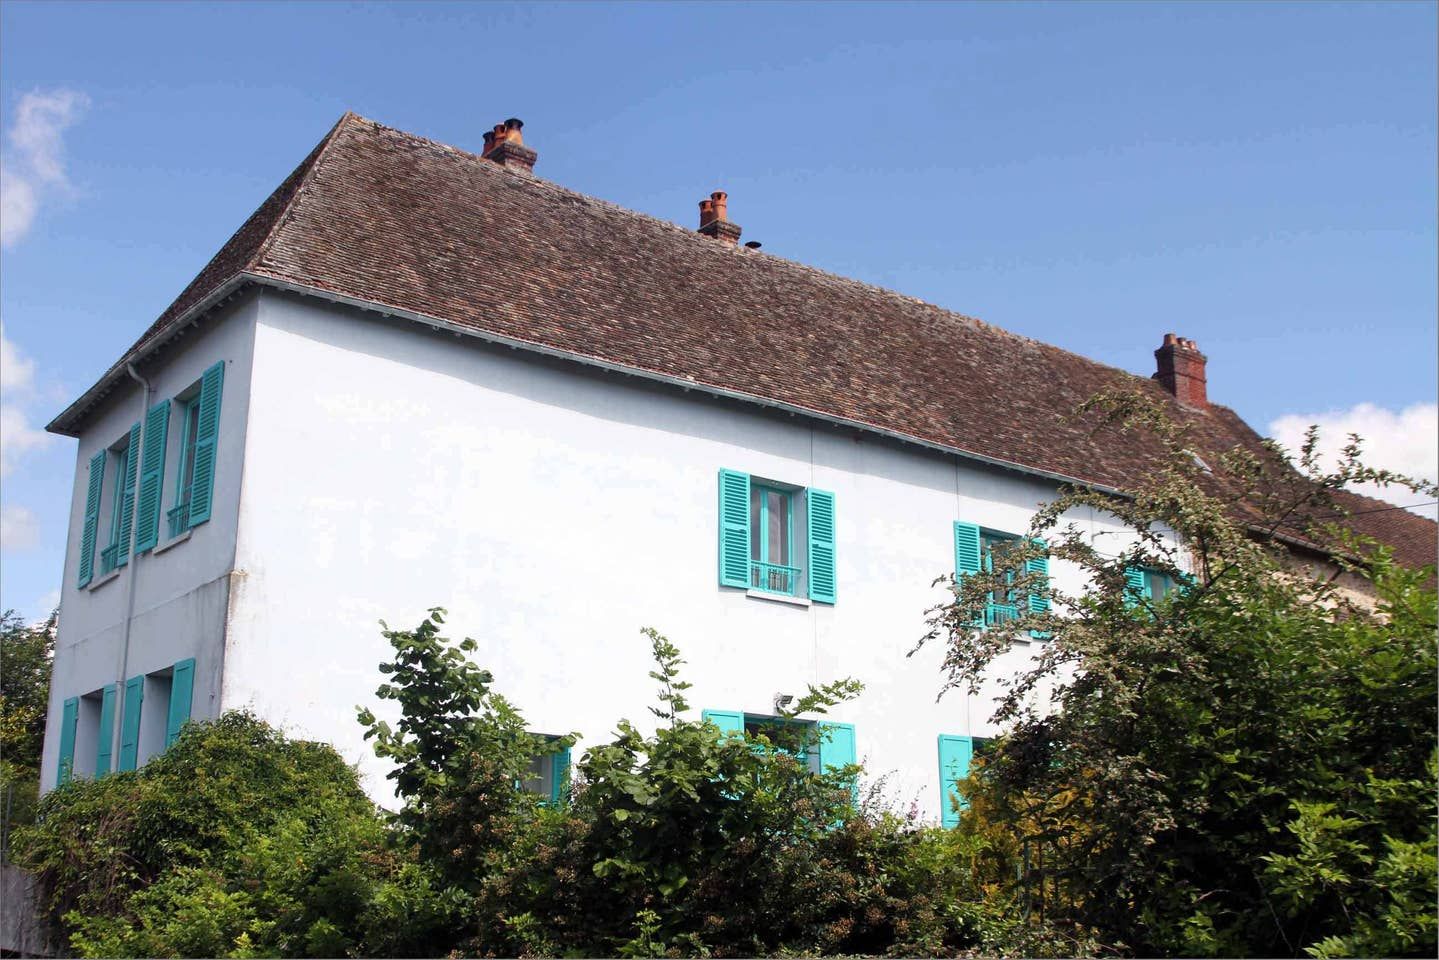 The Blue House, Giverny